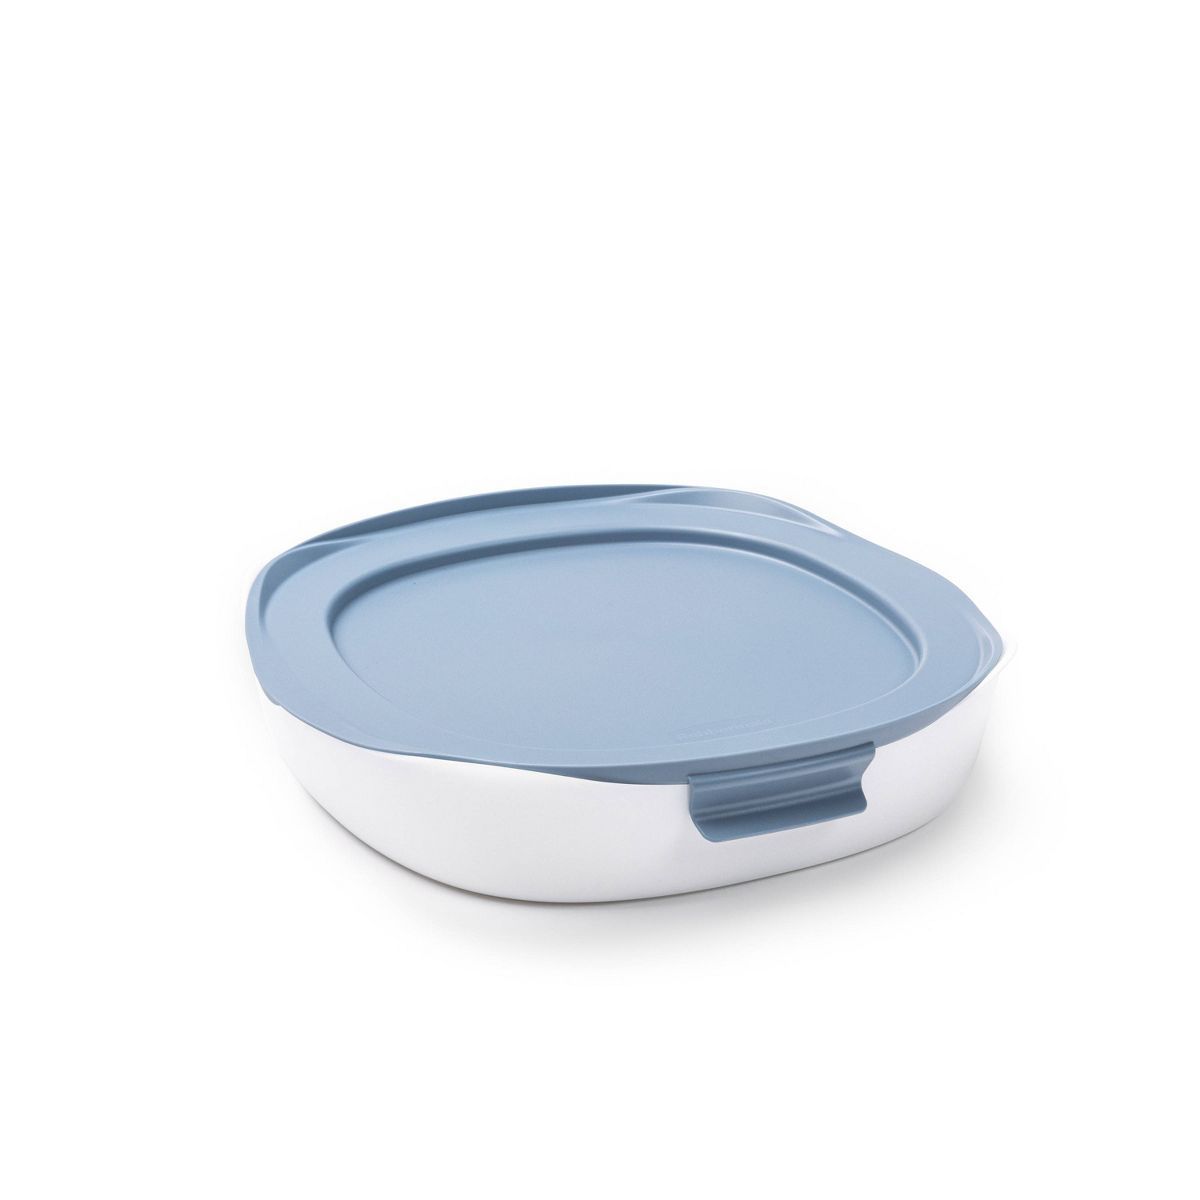 Rubbermaid DuraLite Glass Bakeware 1.75qt Square Baking Dish with Shadow Blue Lid | Target